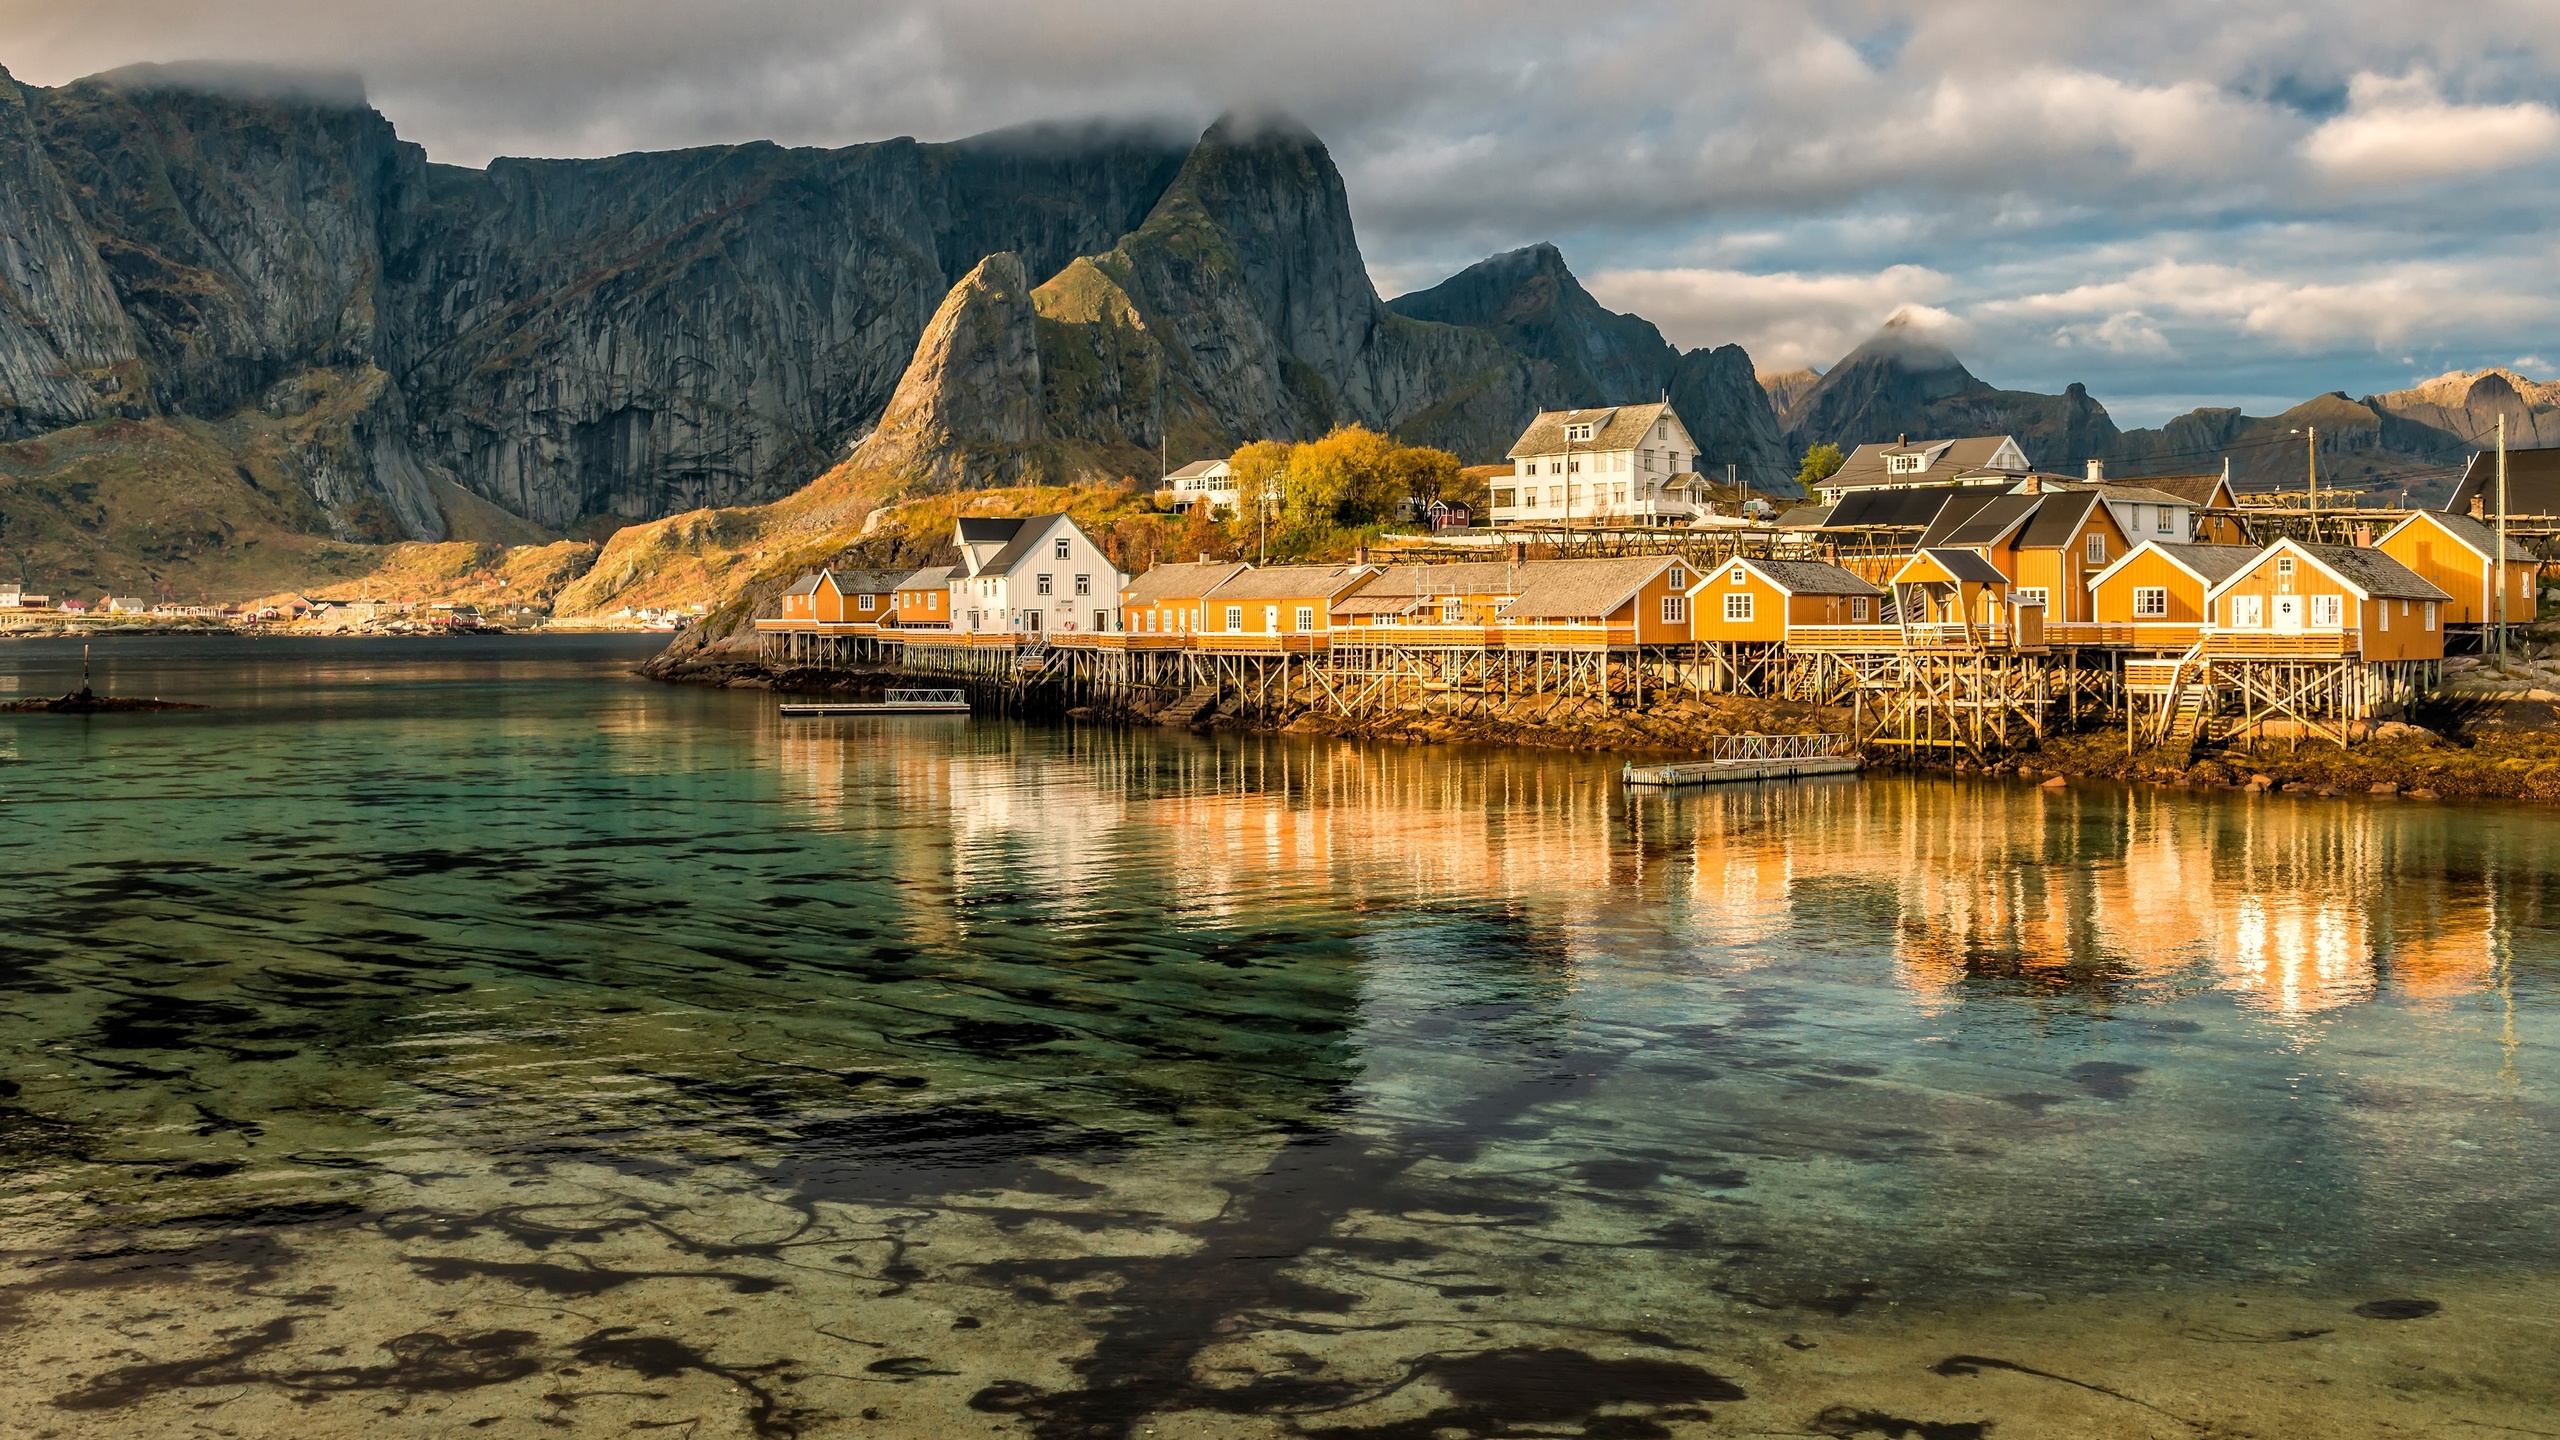 the sky, water, clouds, reflection, landscape, mountains, nature, rocks, shore, tops, the bottom, boats, norway, houses, pond, the village, piles, the lofoten islands